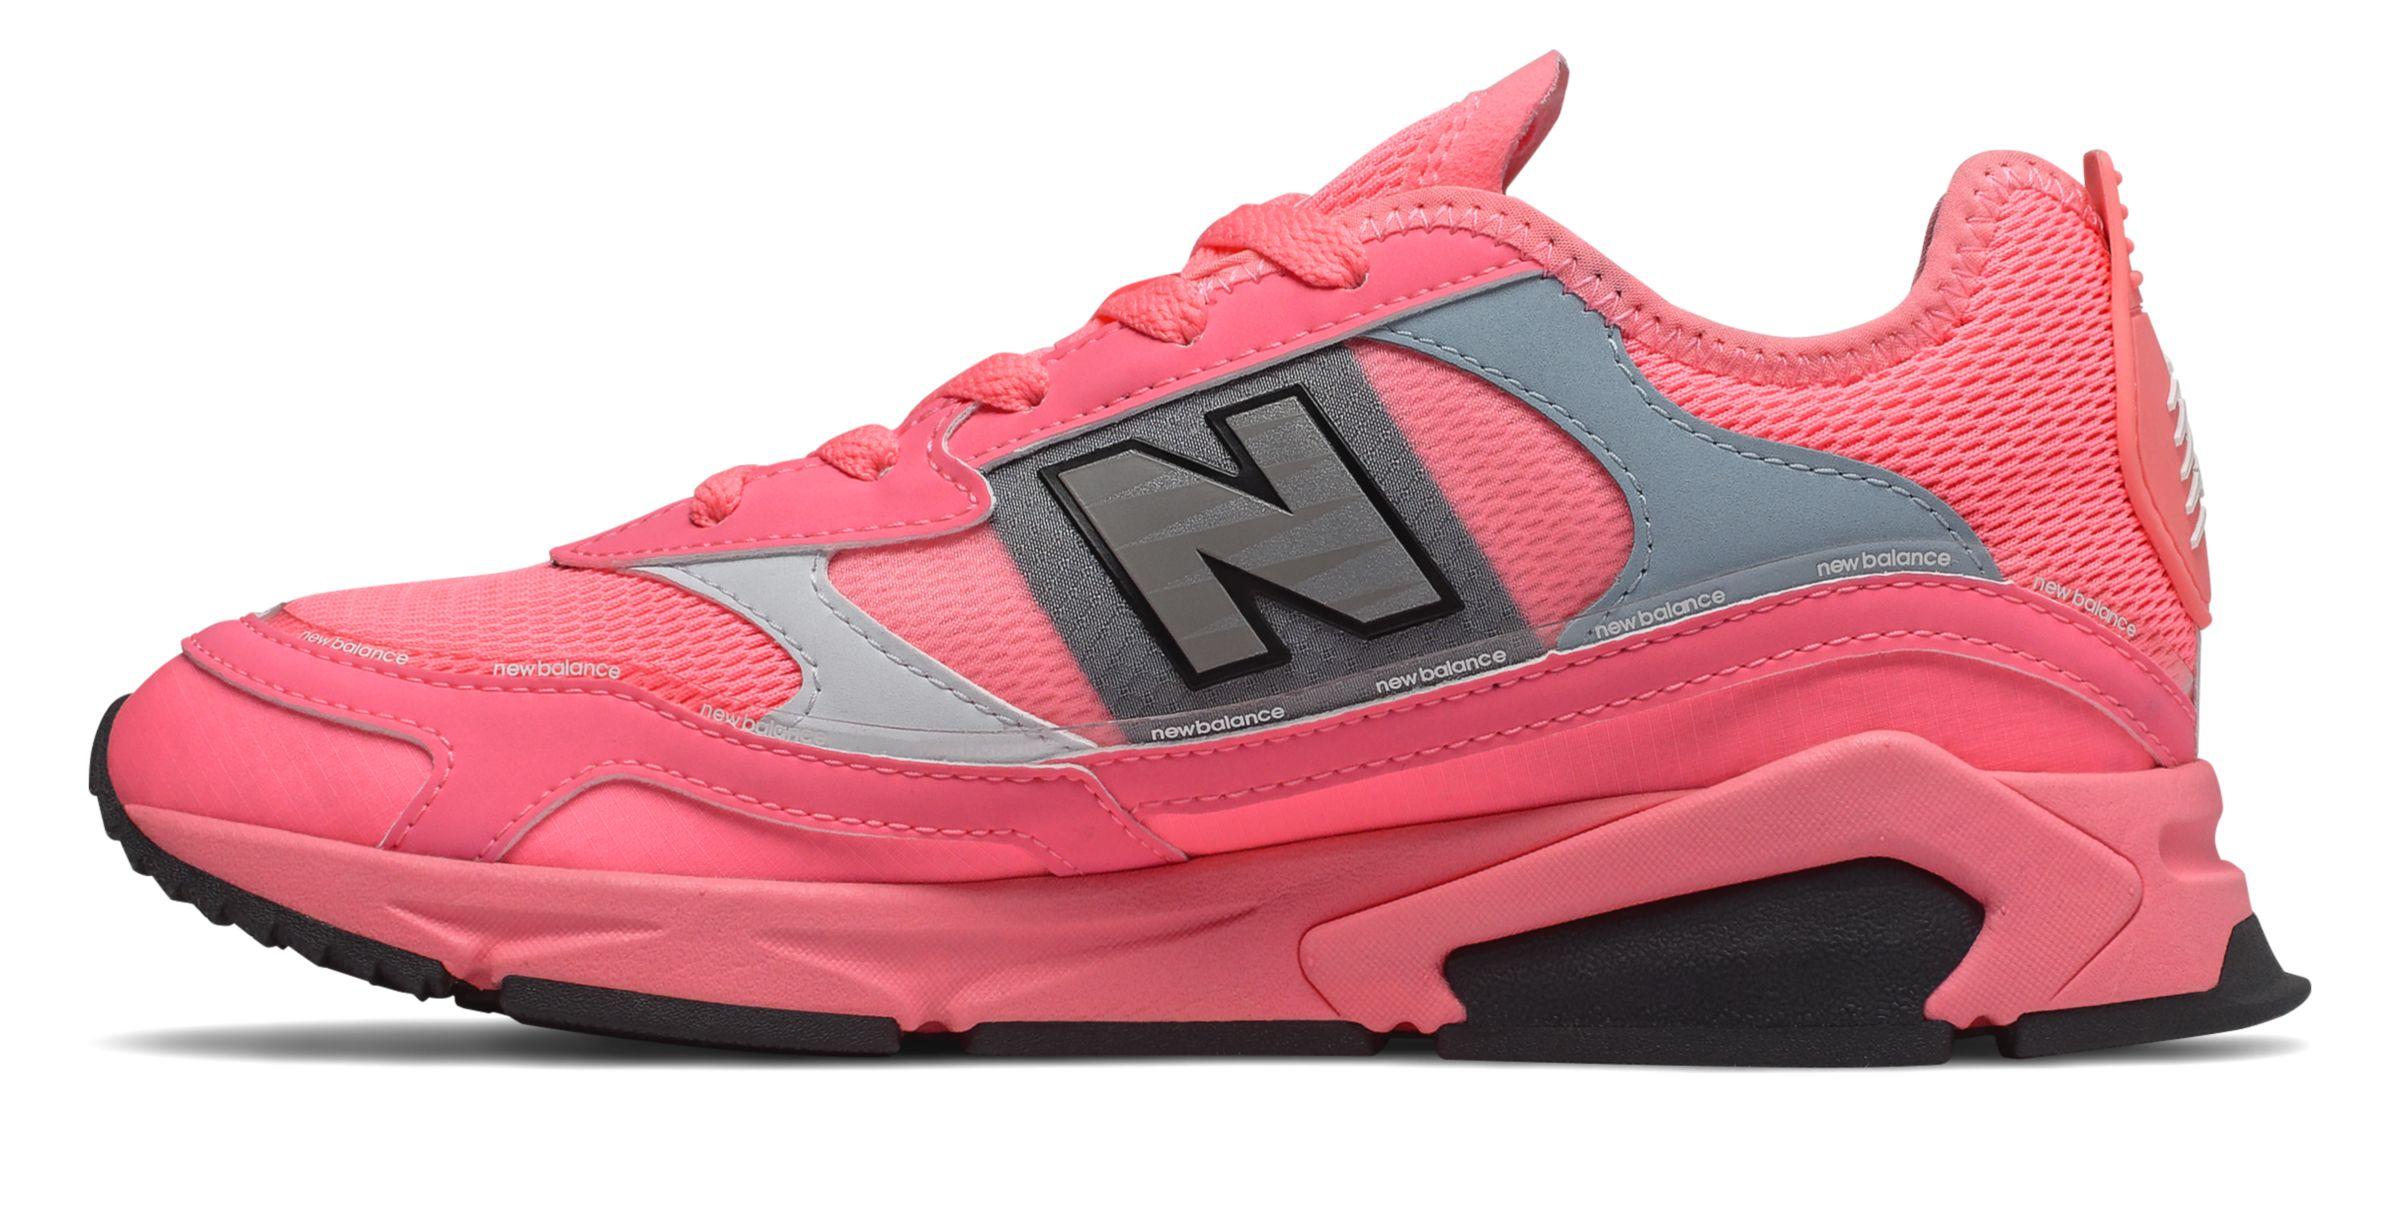 new balance Women's x-racer sneakers in gray and pink